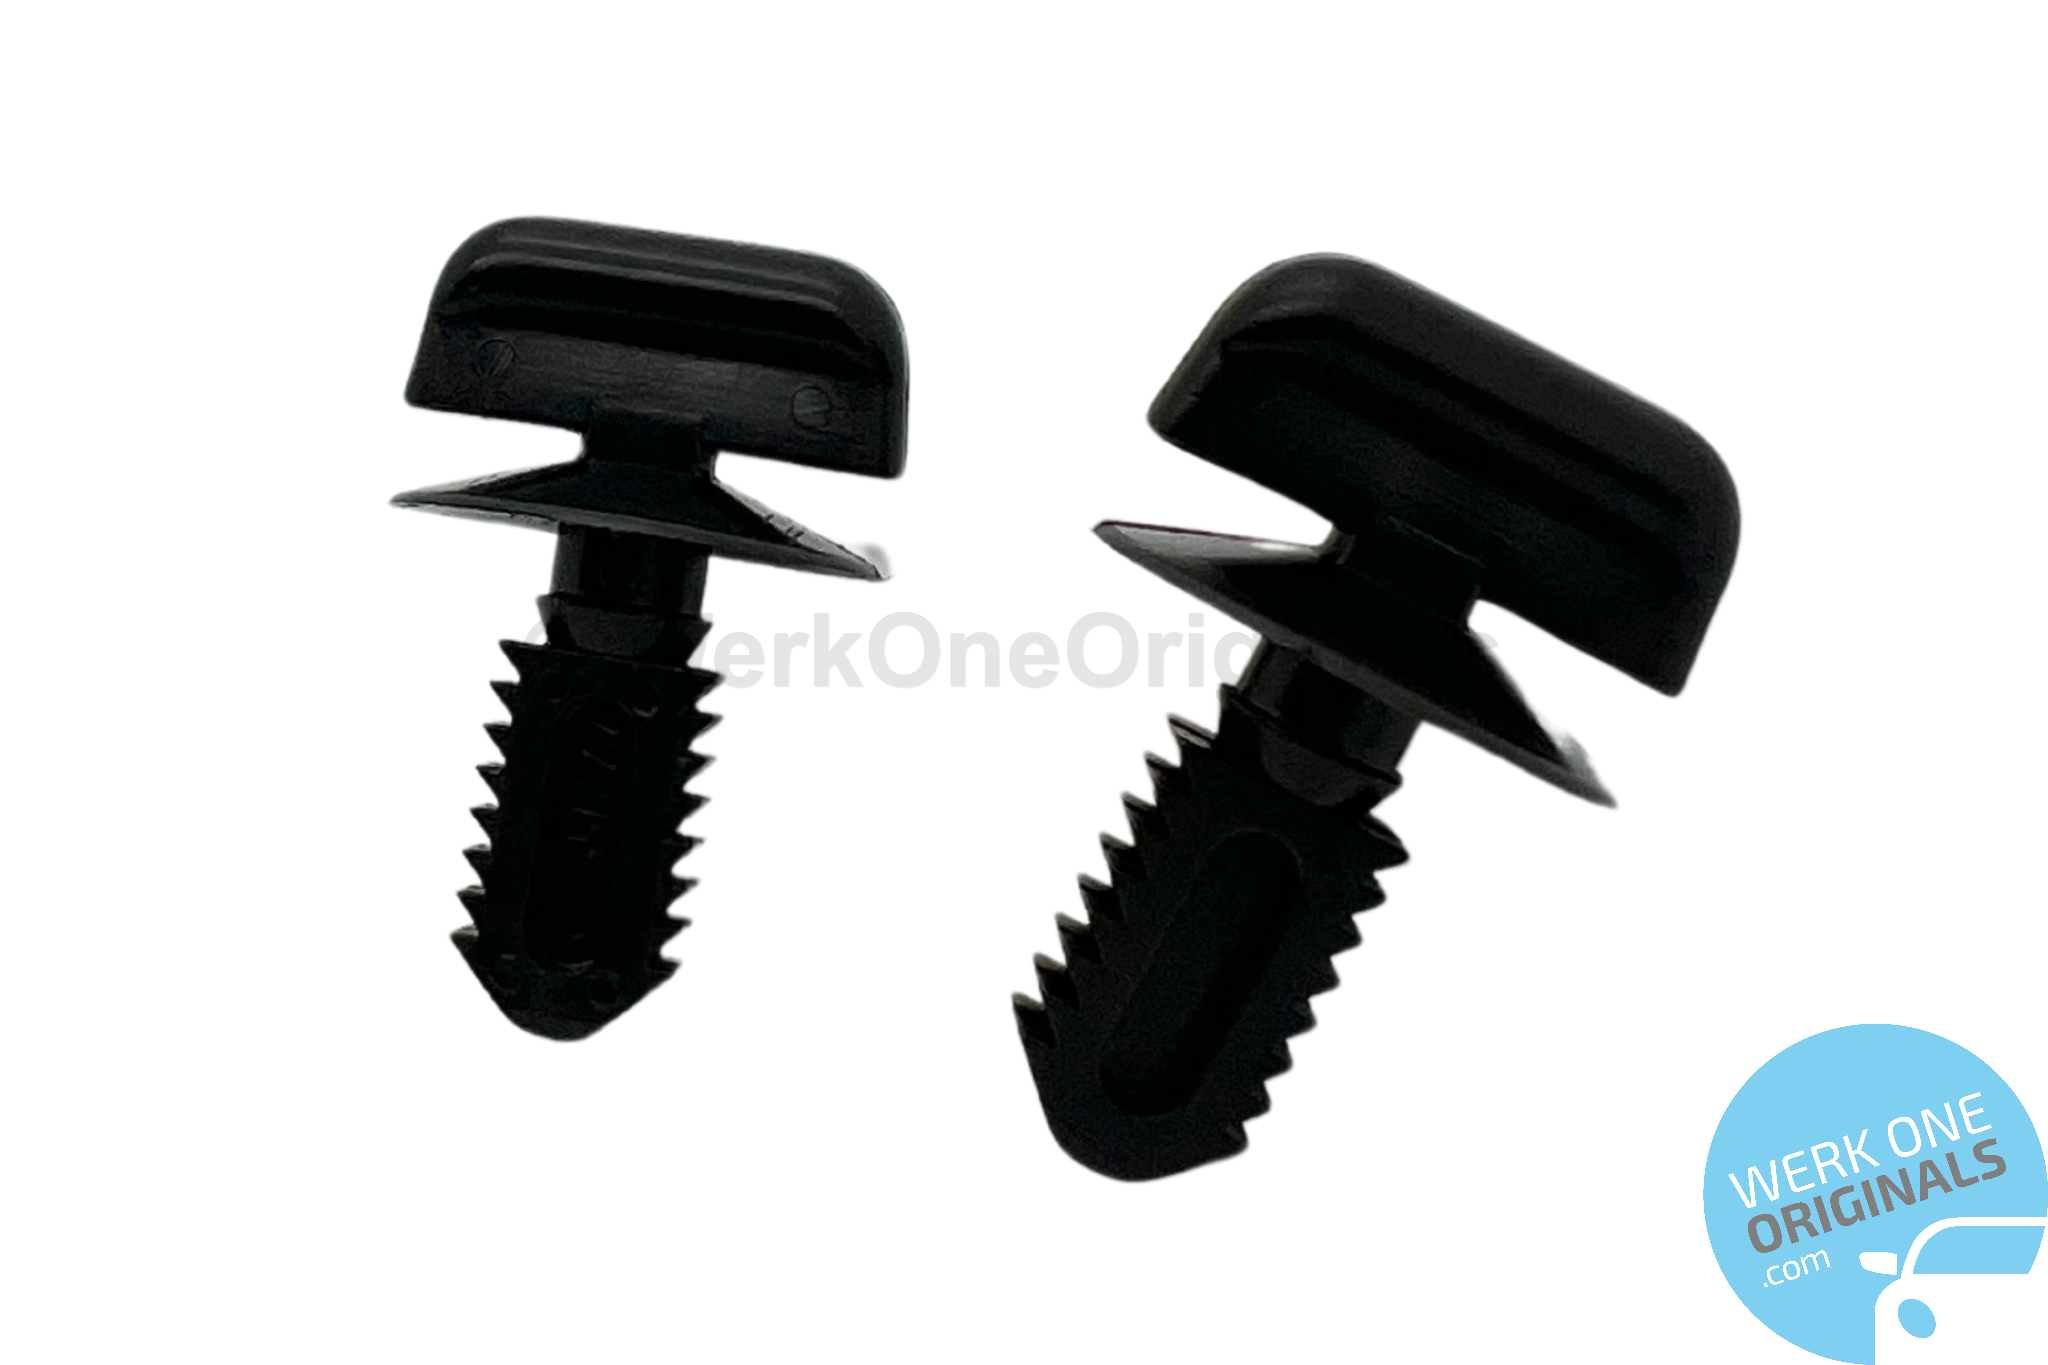 Porsche Genuine Battery Cover Fastening Screws (2x) for Boxster Type 986 Models